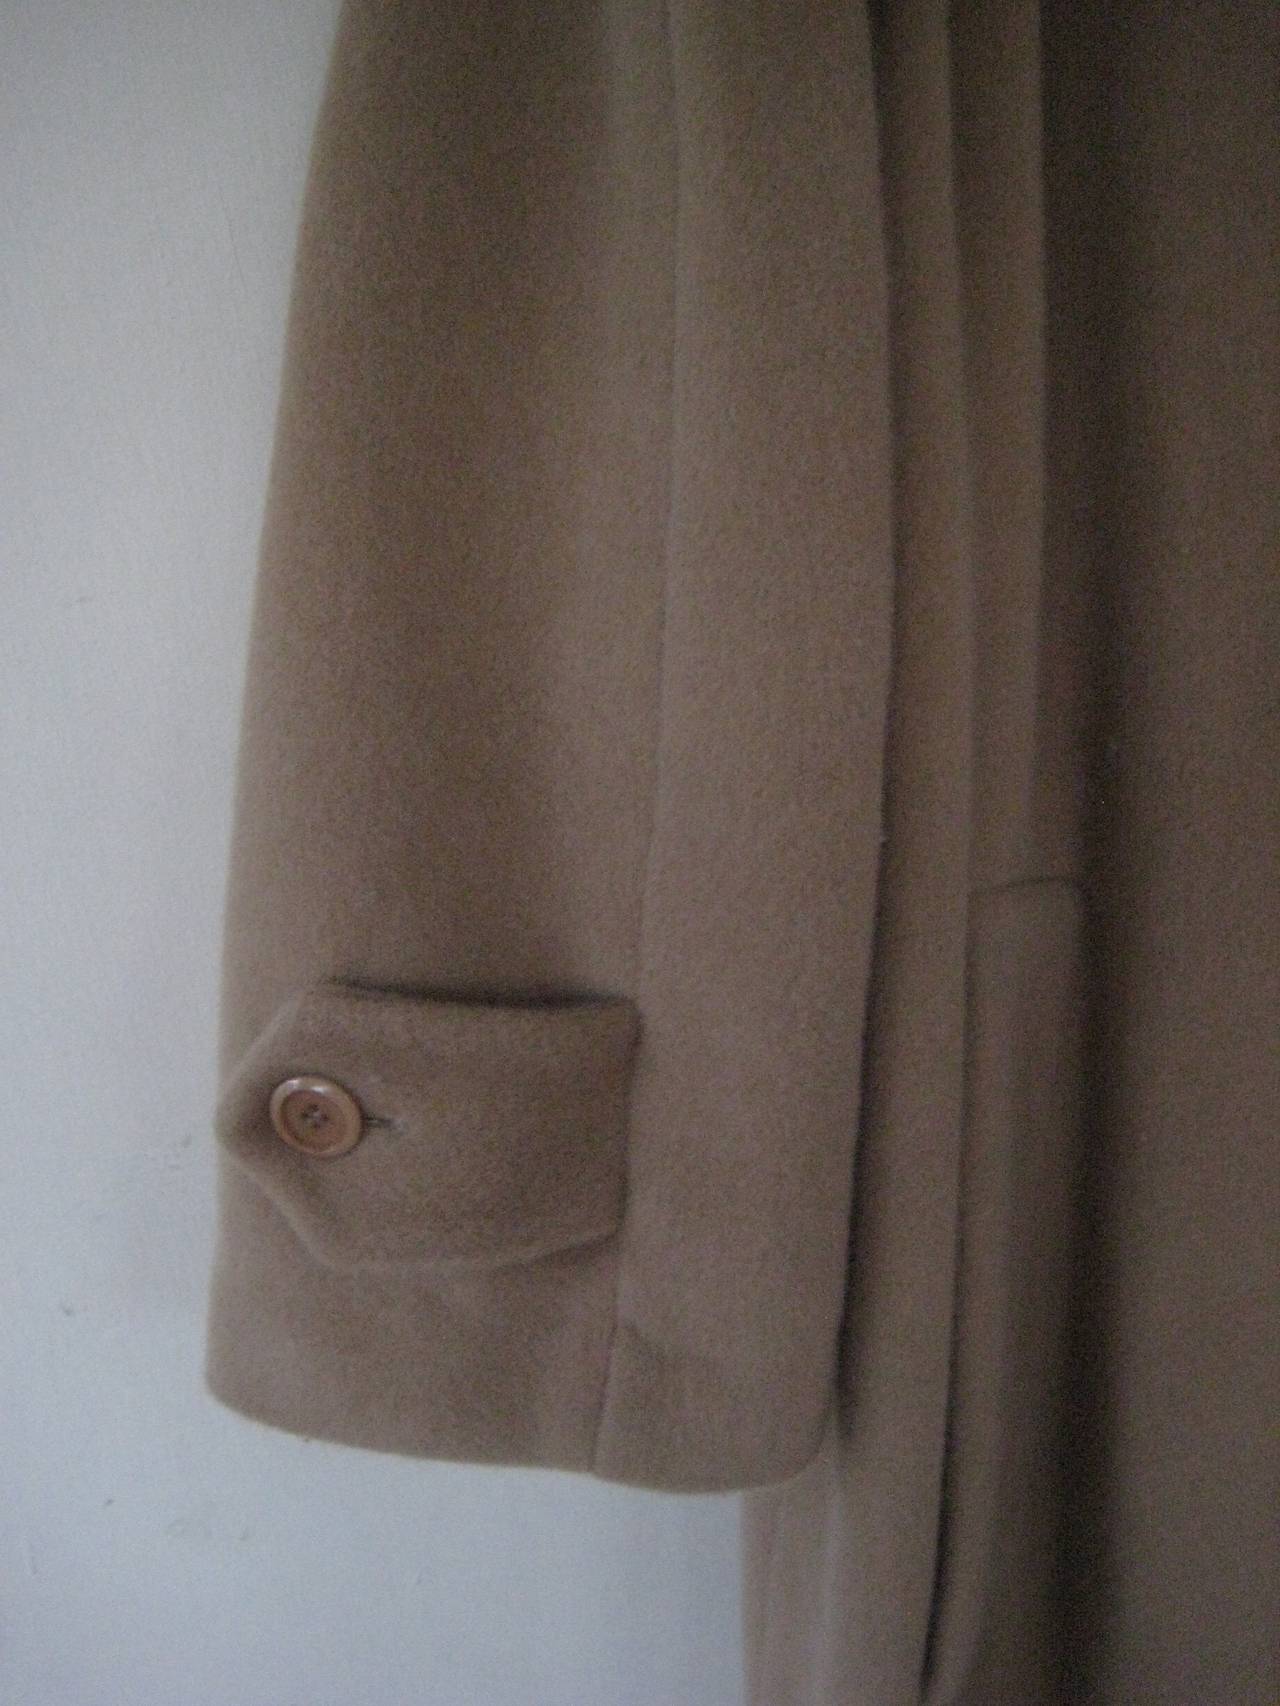 Lucious Moschino coat in a modified 1950s cut 
Slight swing at bottom
2 side slash pockets
Button down front with a hidden placket
Soft  cashmere lined in rayon silk blend, this feels wonderful on
Fabric tags have been removed